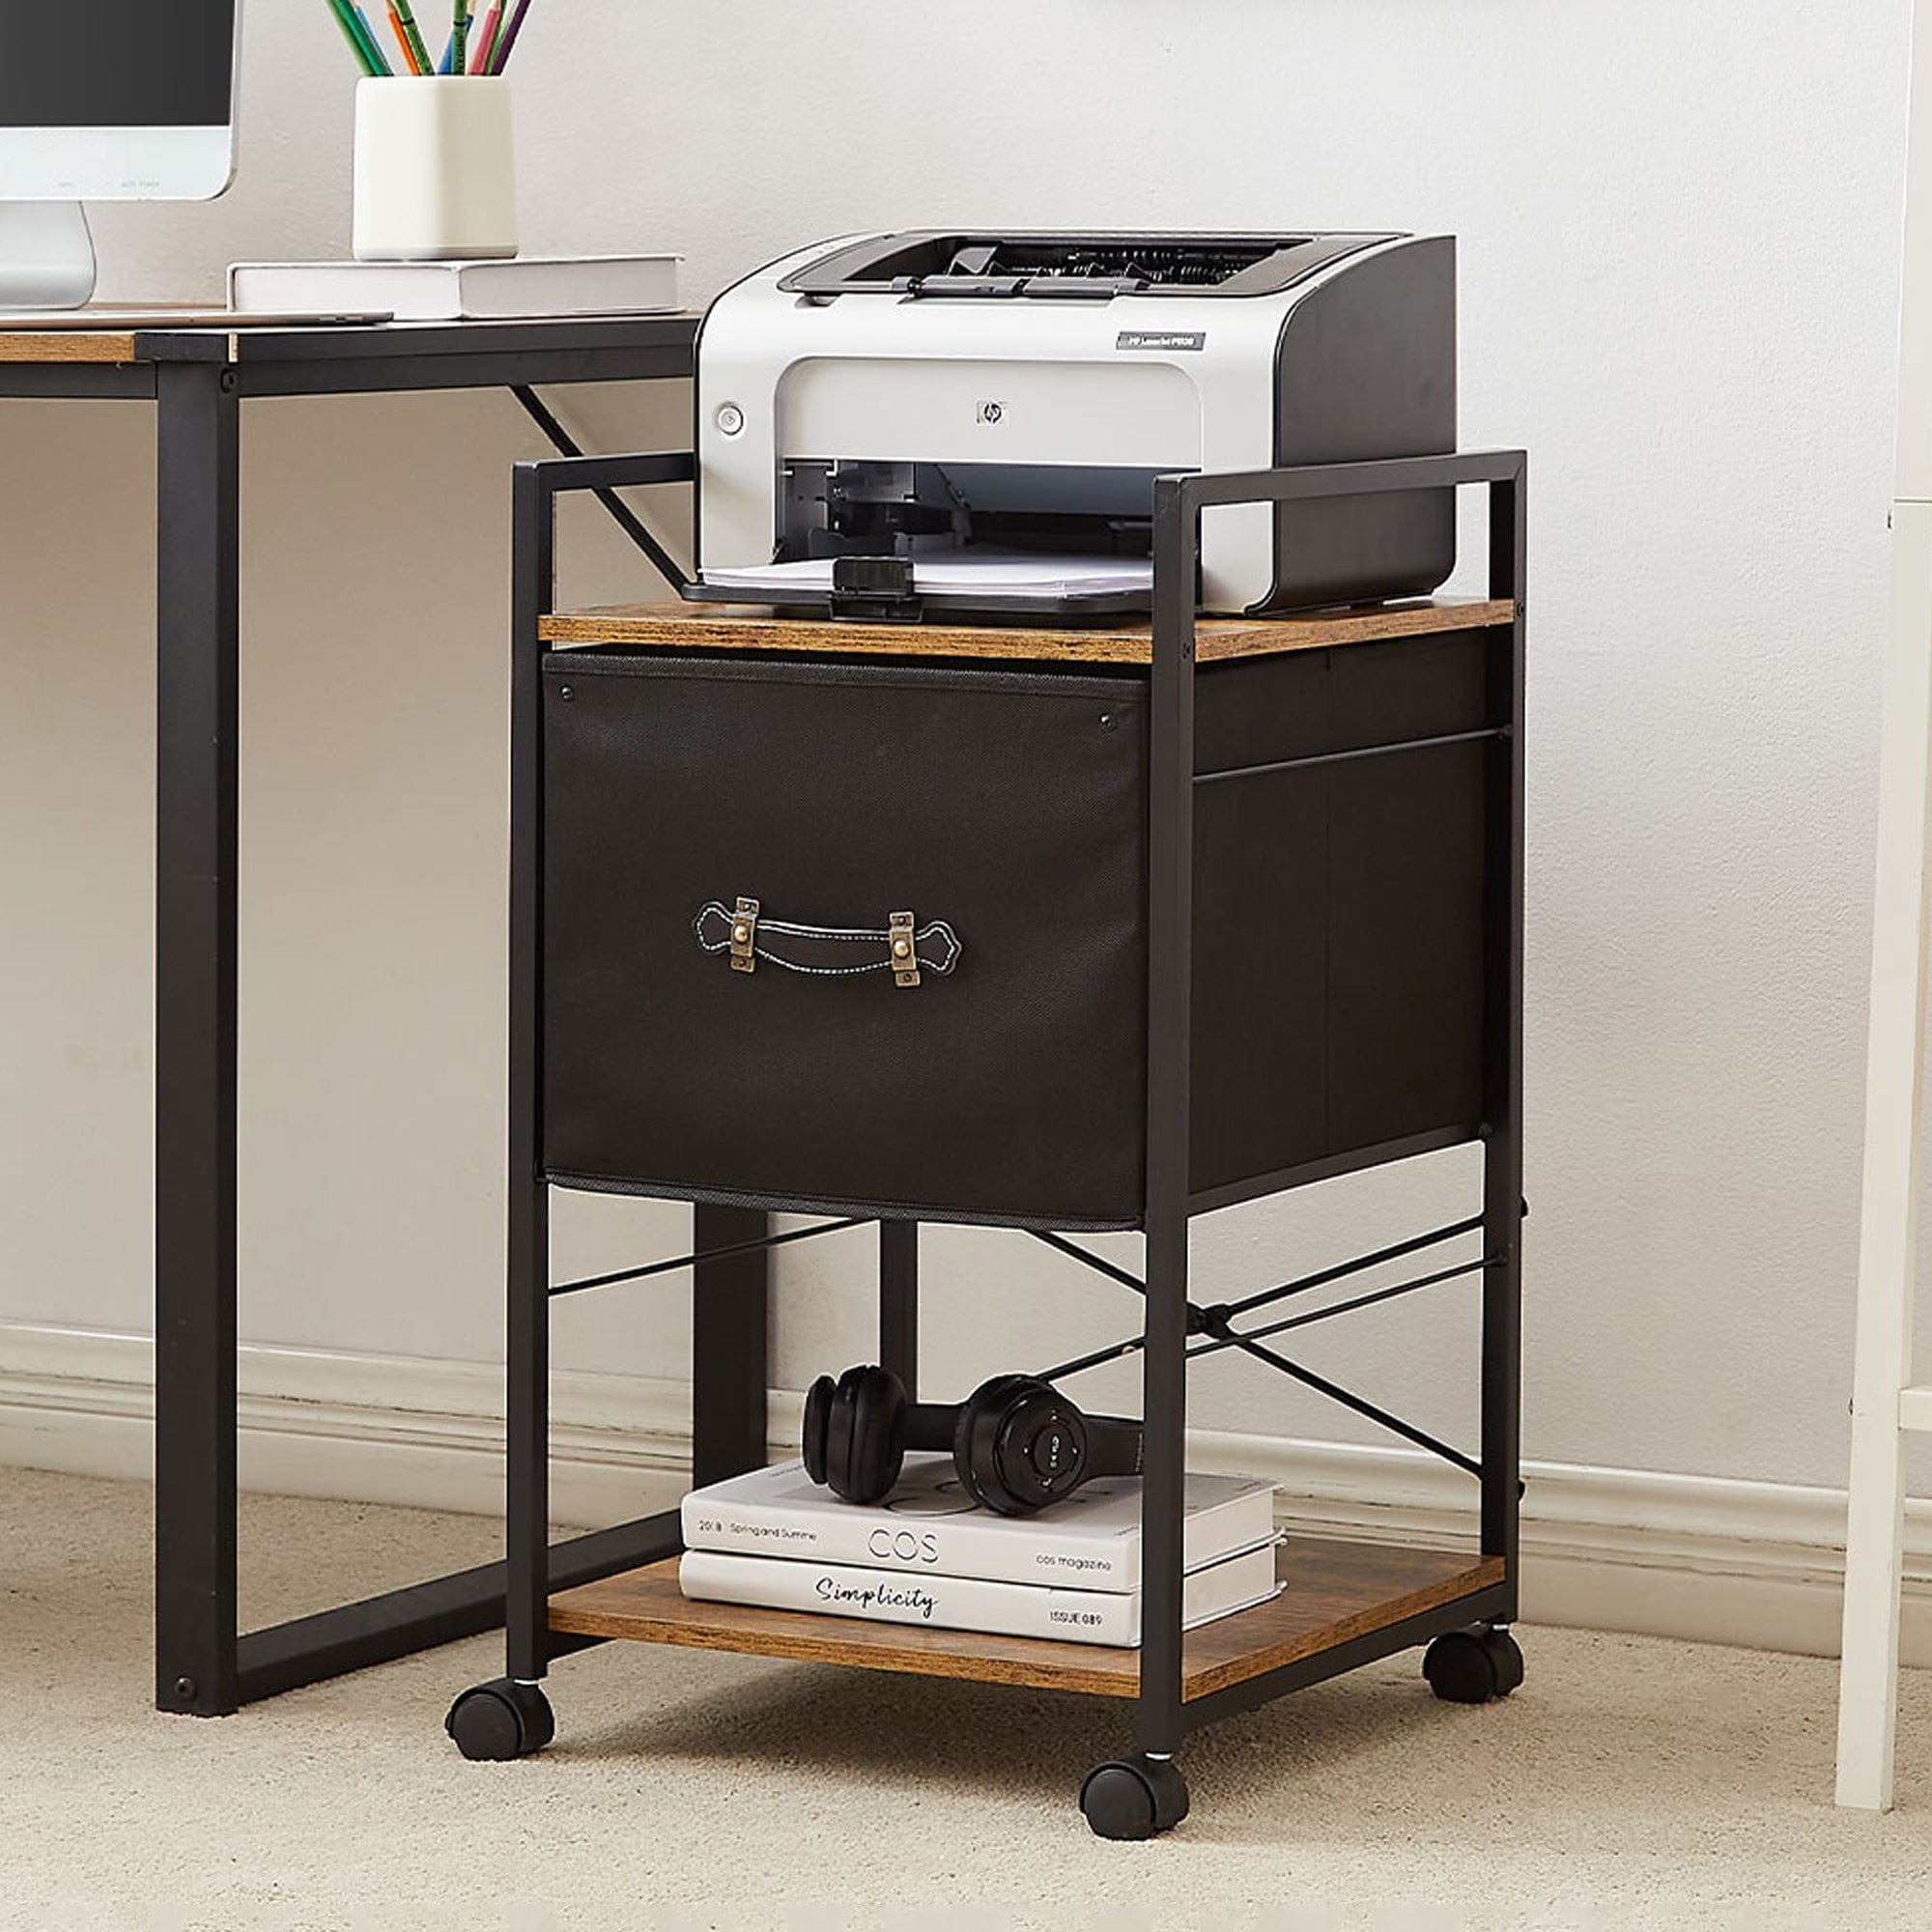 VECELO 3 Drawer Lateral File Cabinet, Rolling Printer Stand with Open